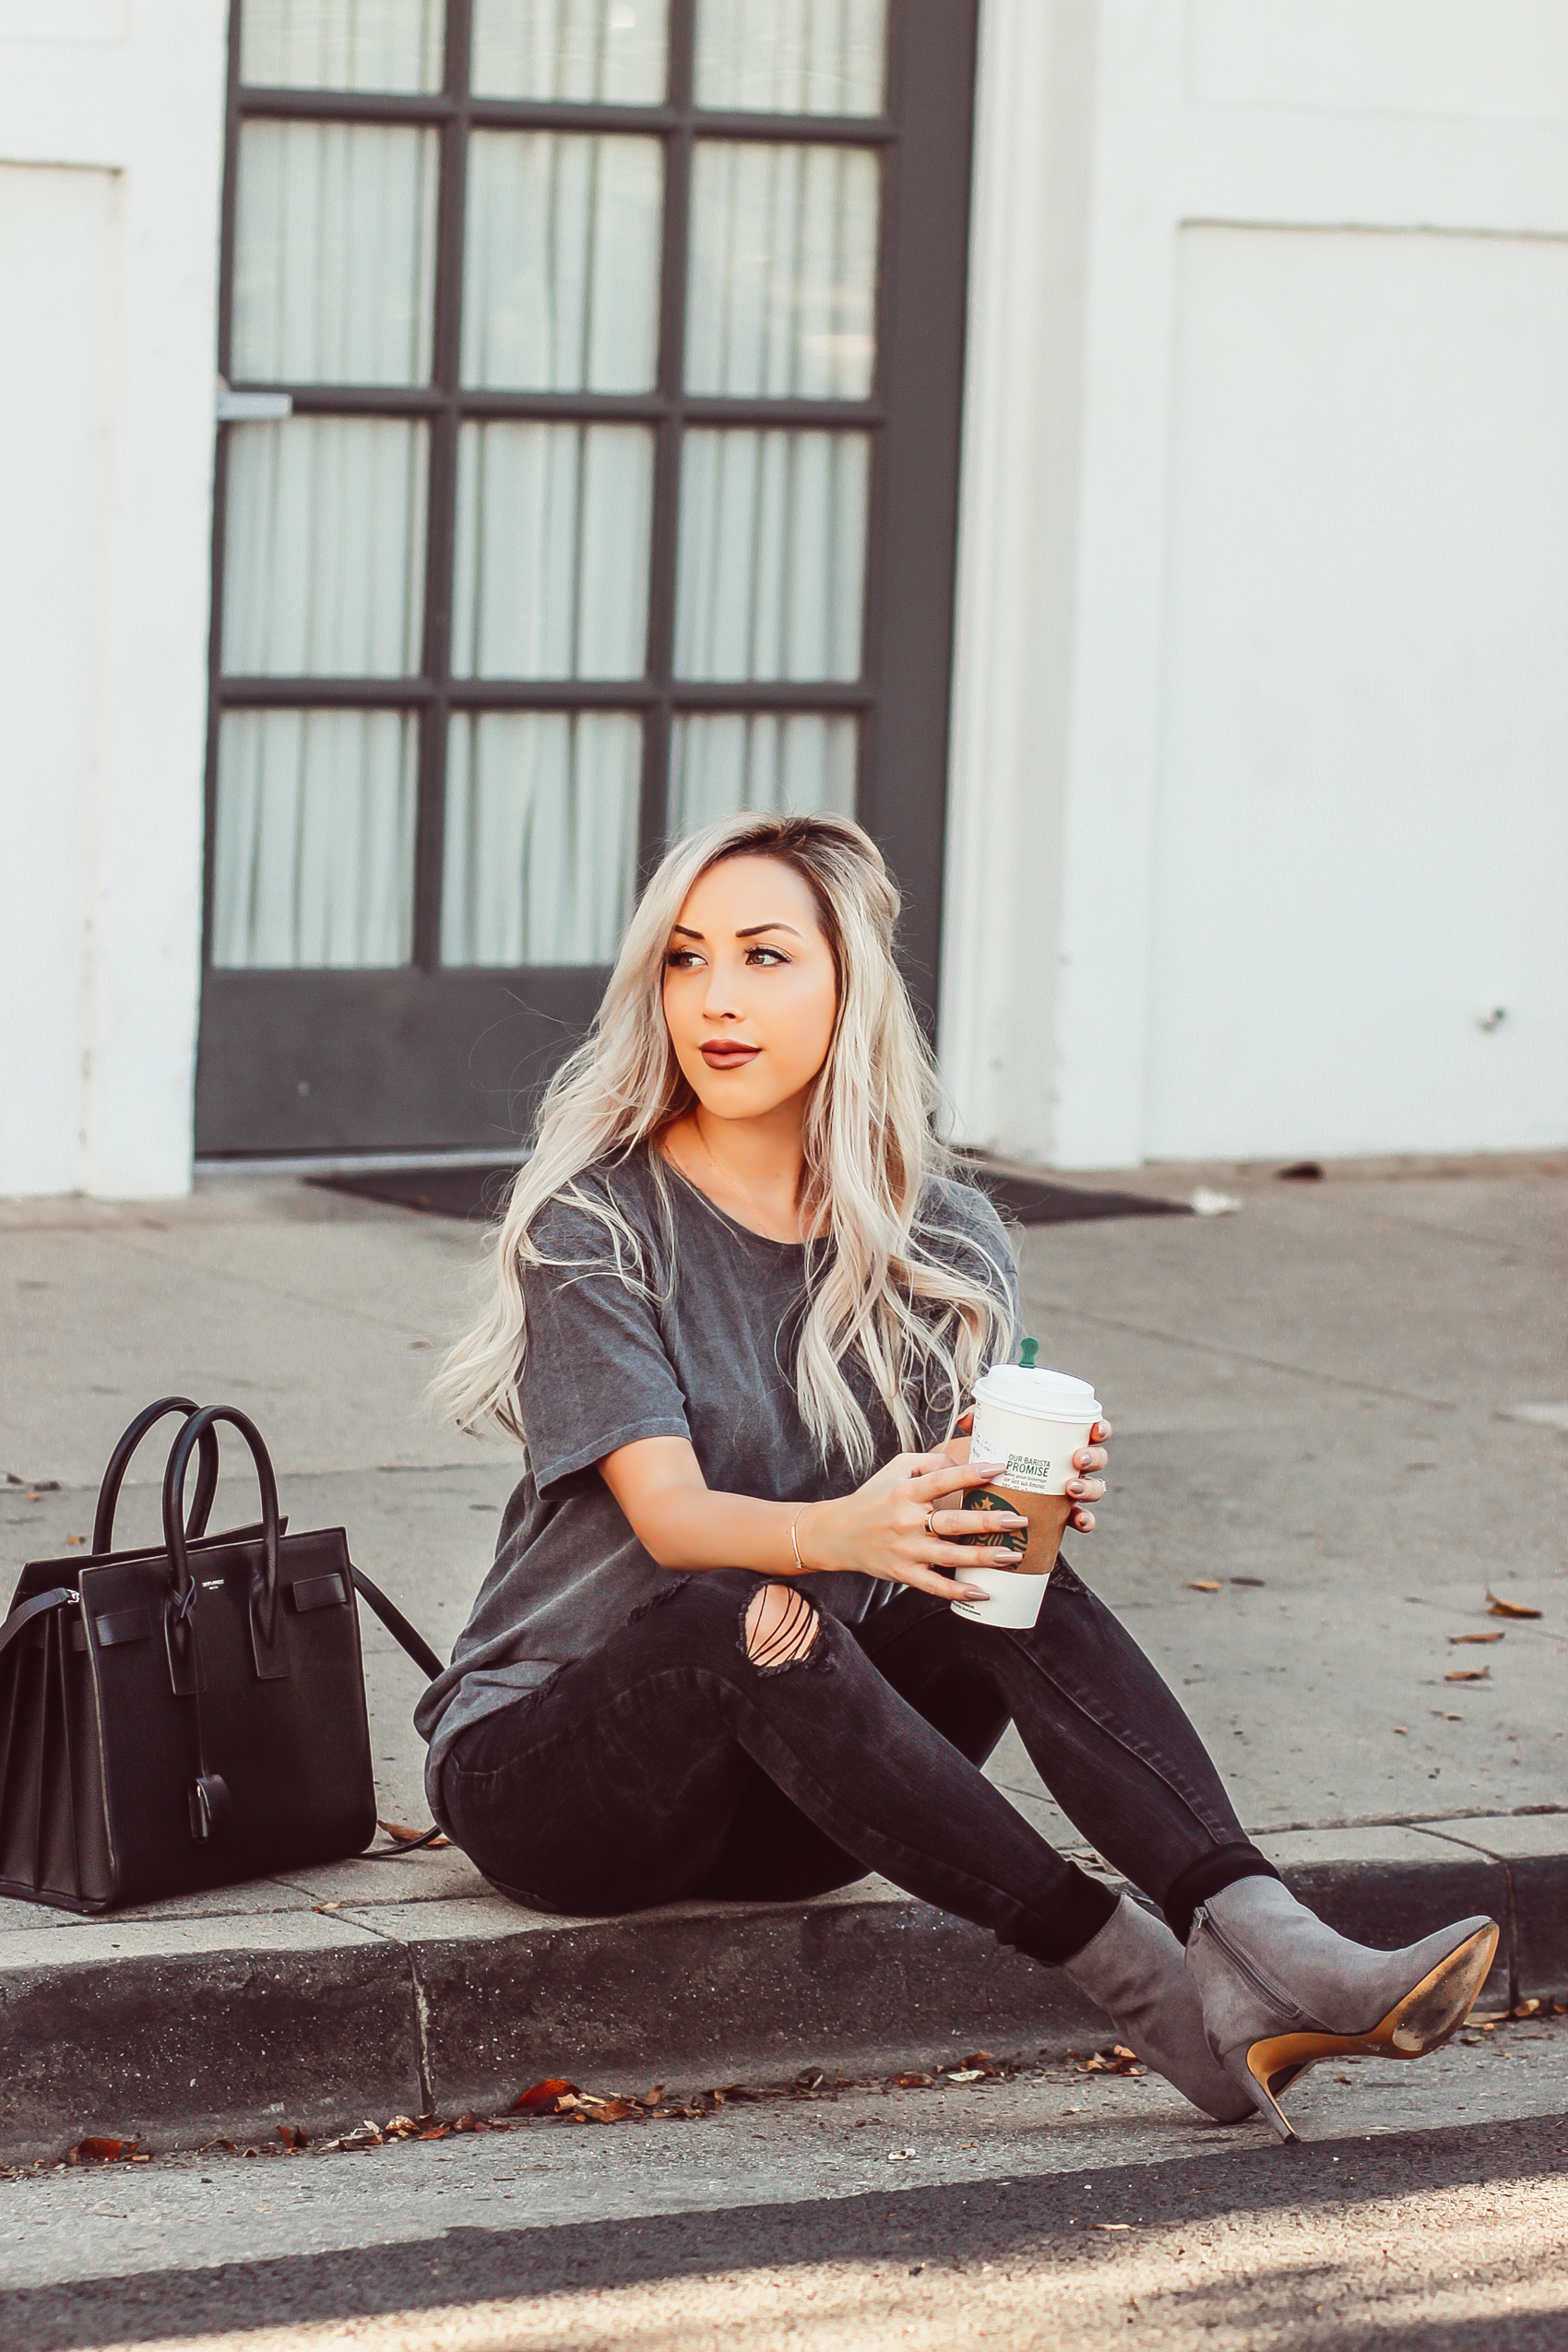 Men's Urban Outfitters Tee for an Girly/Edgy Look | Blondie in the City by Hayley Larue